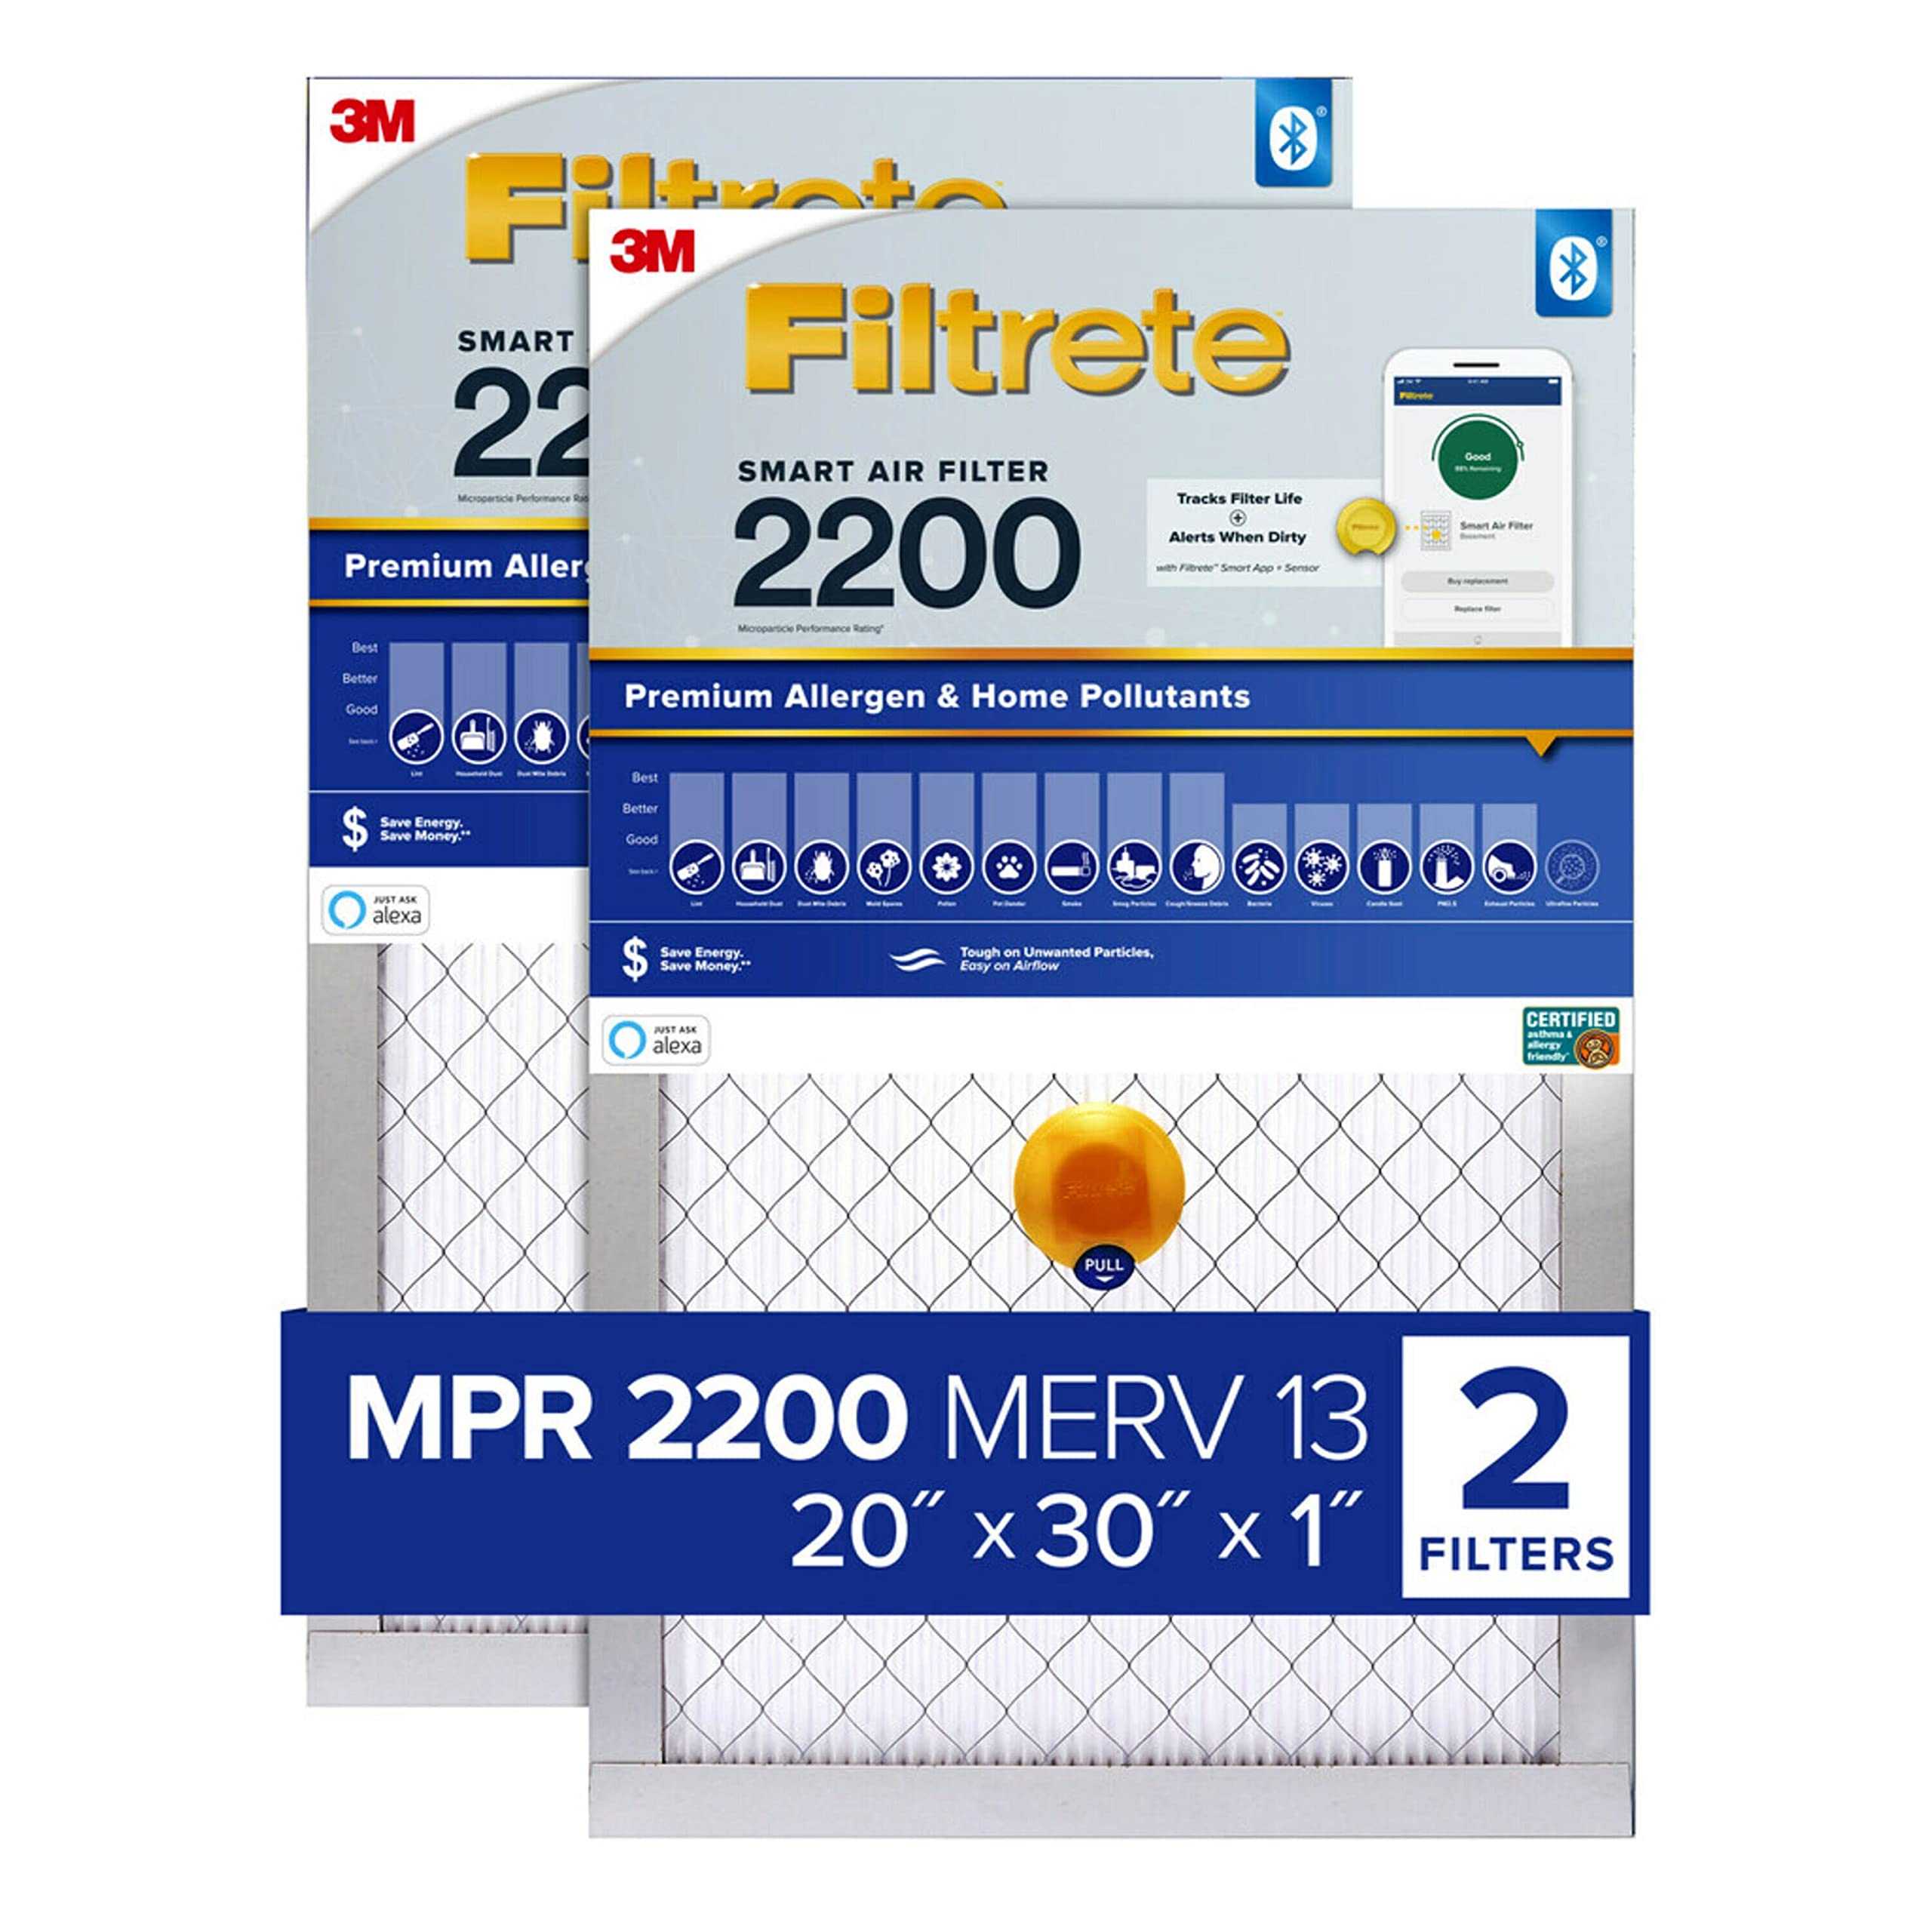 Filtrete 20x30x1 Smart Air Filter, MPR 2200 MERV 13, 1-Inch Premium Allergen & Home Pollutant Air Filters for AC and Furnace, 2 Filters